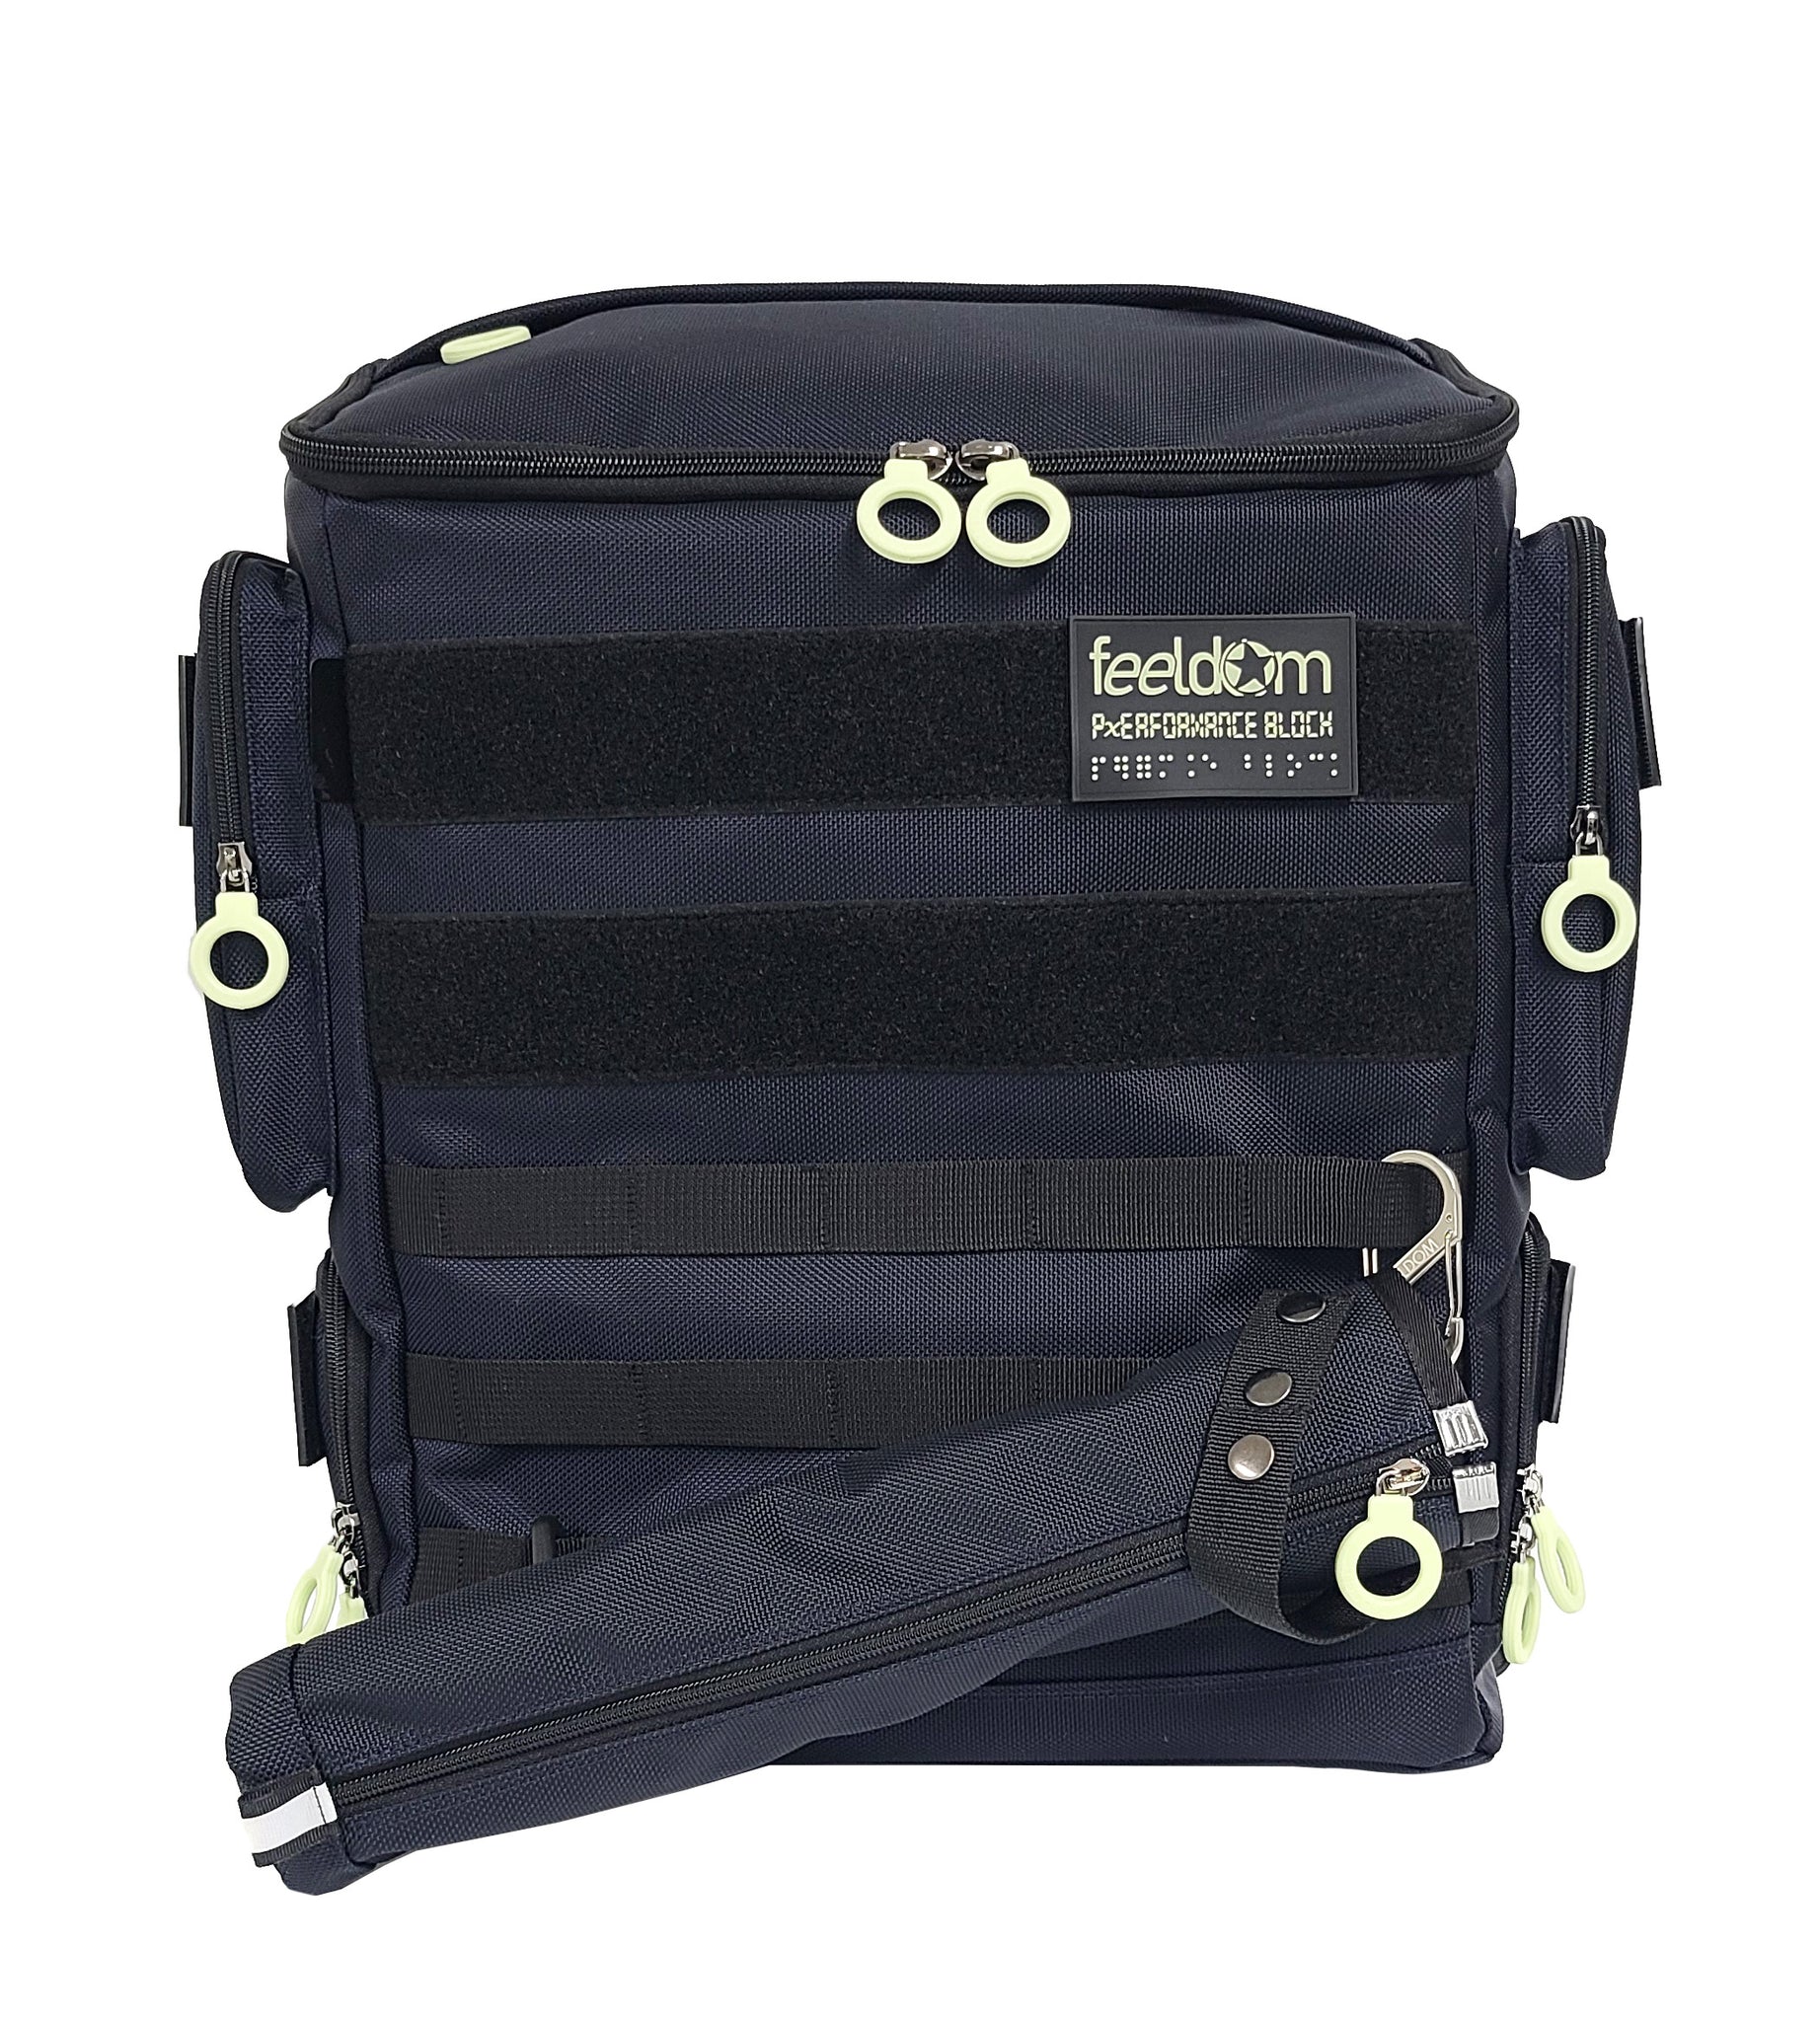 Front view of the Performance Block Medium S-Series featuring the new Cane pouch with a zipper and a metal carabiner attached to the front of the backpack. It has the matching color of the bag and a white zipper ring.